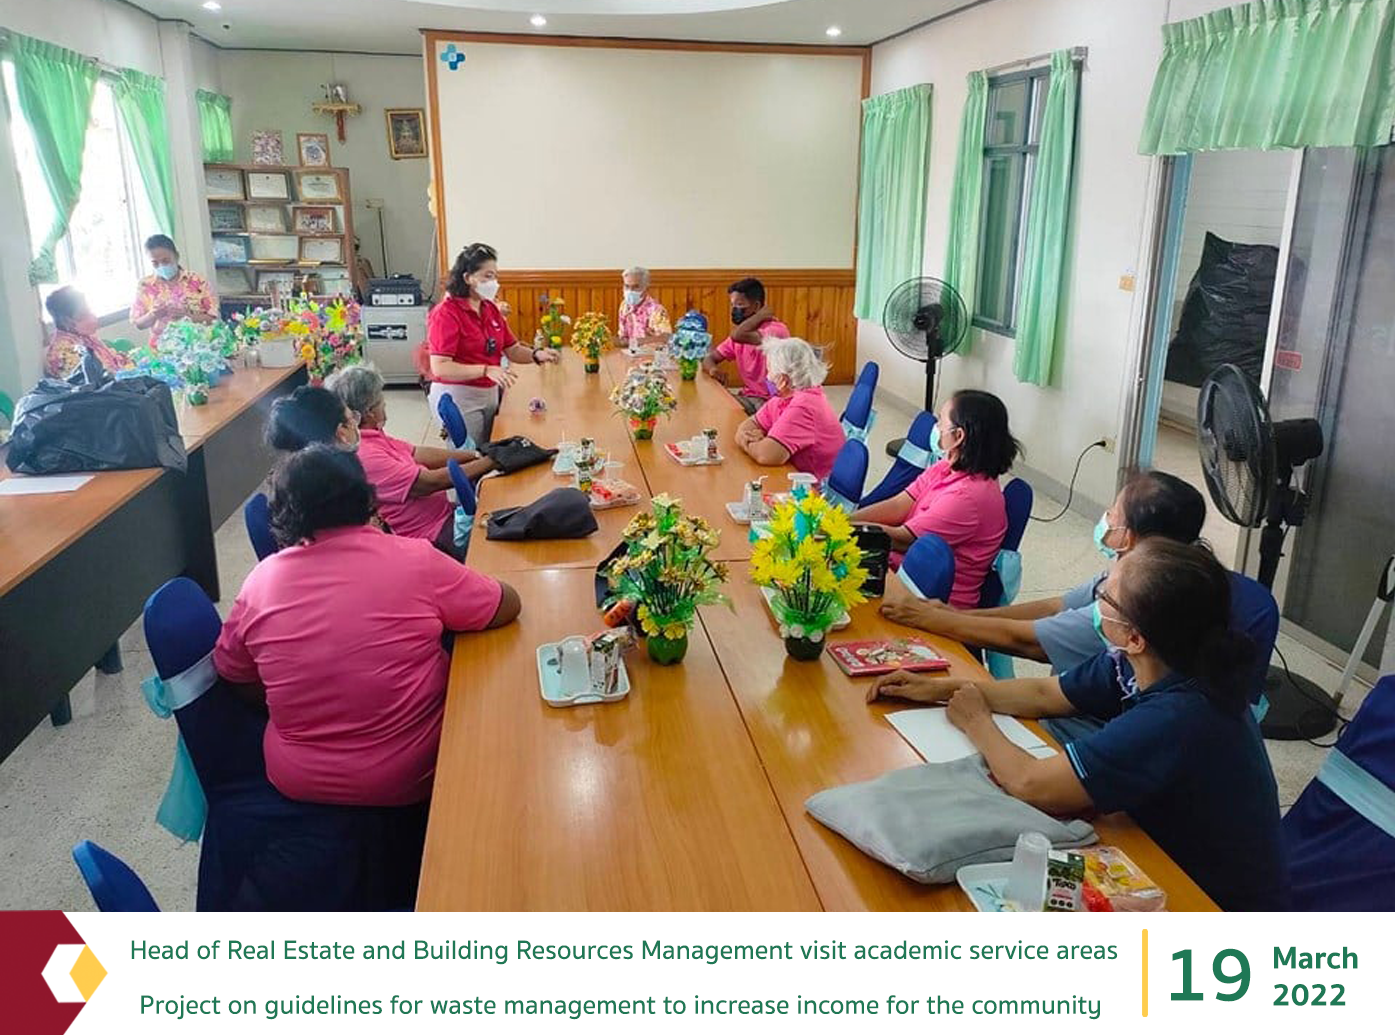 Head of Real Estate and Building Resources Management visit academic service areas Project on the management of residual waste to increase the community’s income